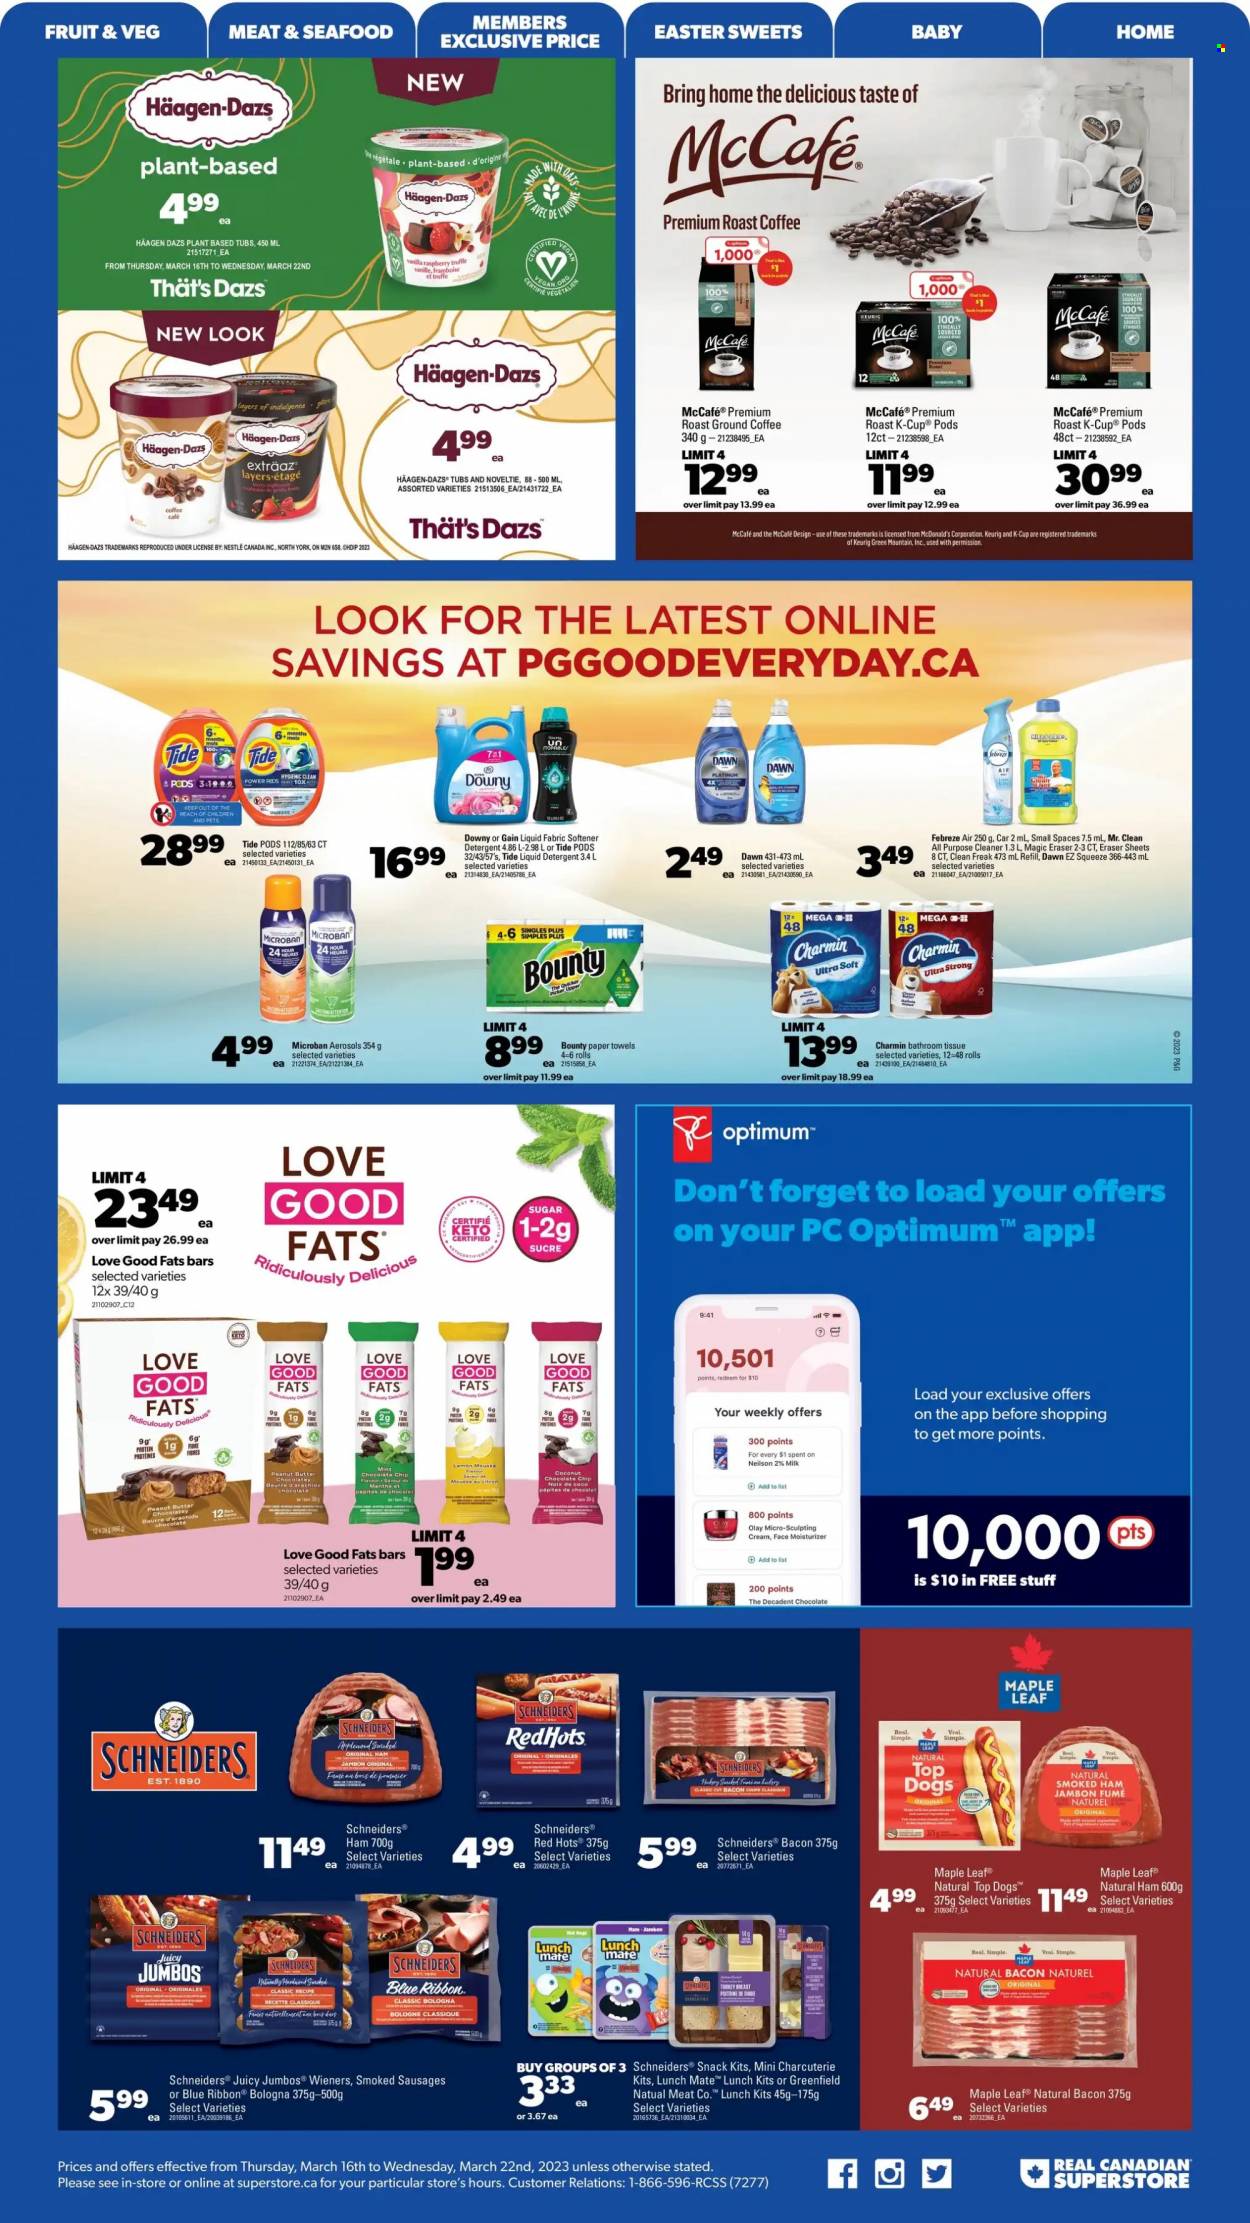 thumbnail - Real Canadian Superstore Flyer - March 16, 2023 - March 22, 2023 - Sales products - Blue Ribbon, coconut, seafood, roast, bacon, ham, smoked ham, bologna sausage, sausage, milk, Häagen-Dazs, potato fries, snack, Bounty, truffles, sugar, peanut butter, coffee, ground coffee, coffee capsules, McCafe, K-Cups, Keurig, Green Mountain, turkey, bath tissue, kitchen towels, paper towels, Charmin, Febreze, Gain, cleaner, all purpose cleaner, Tide, fabric softener, liquid detergent, moisturizer, Olay, eraser, Optimum, detergent, Nestlé. Page 19.